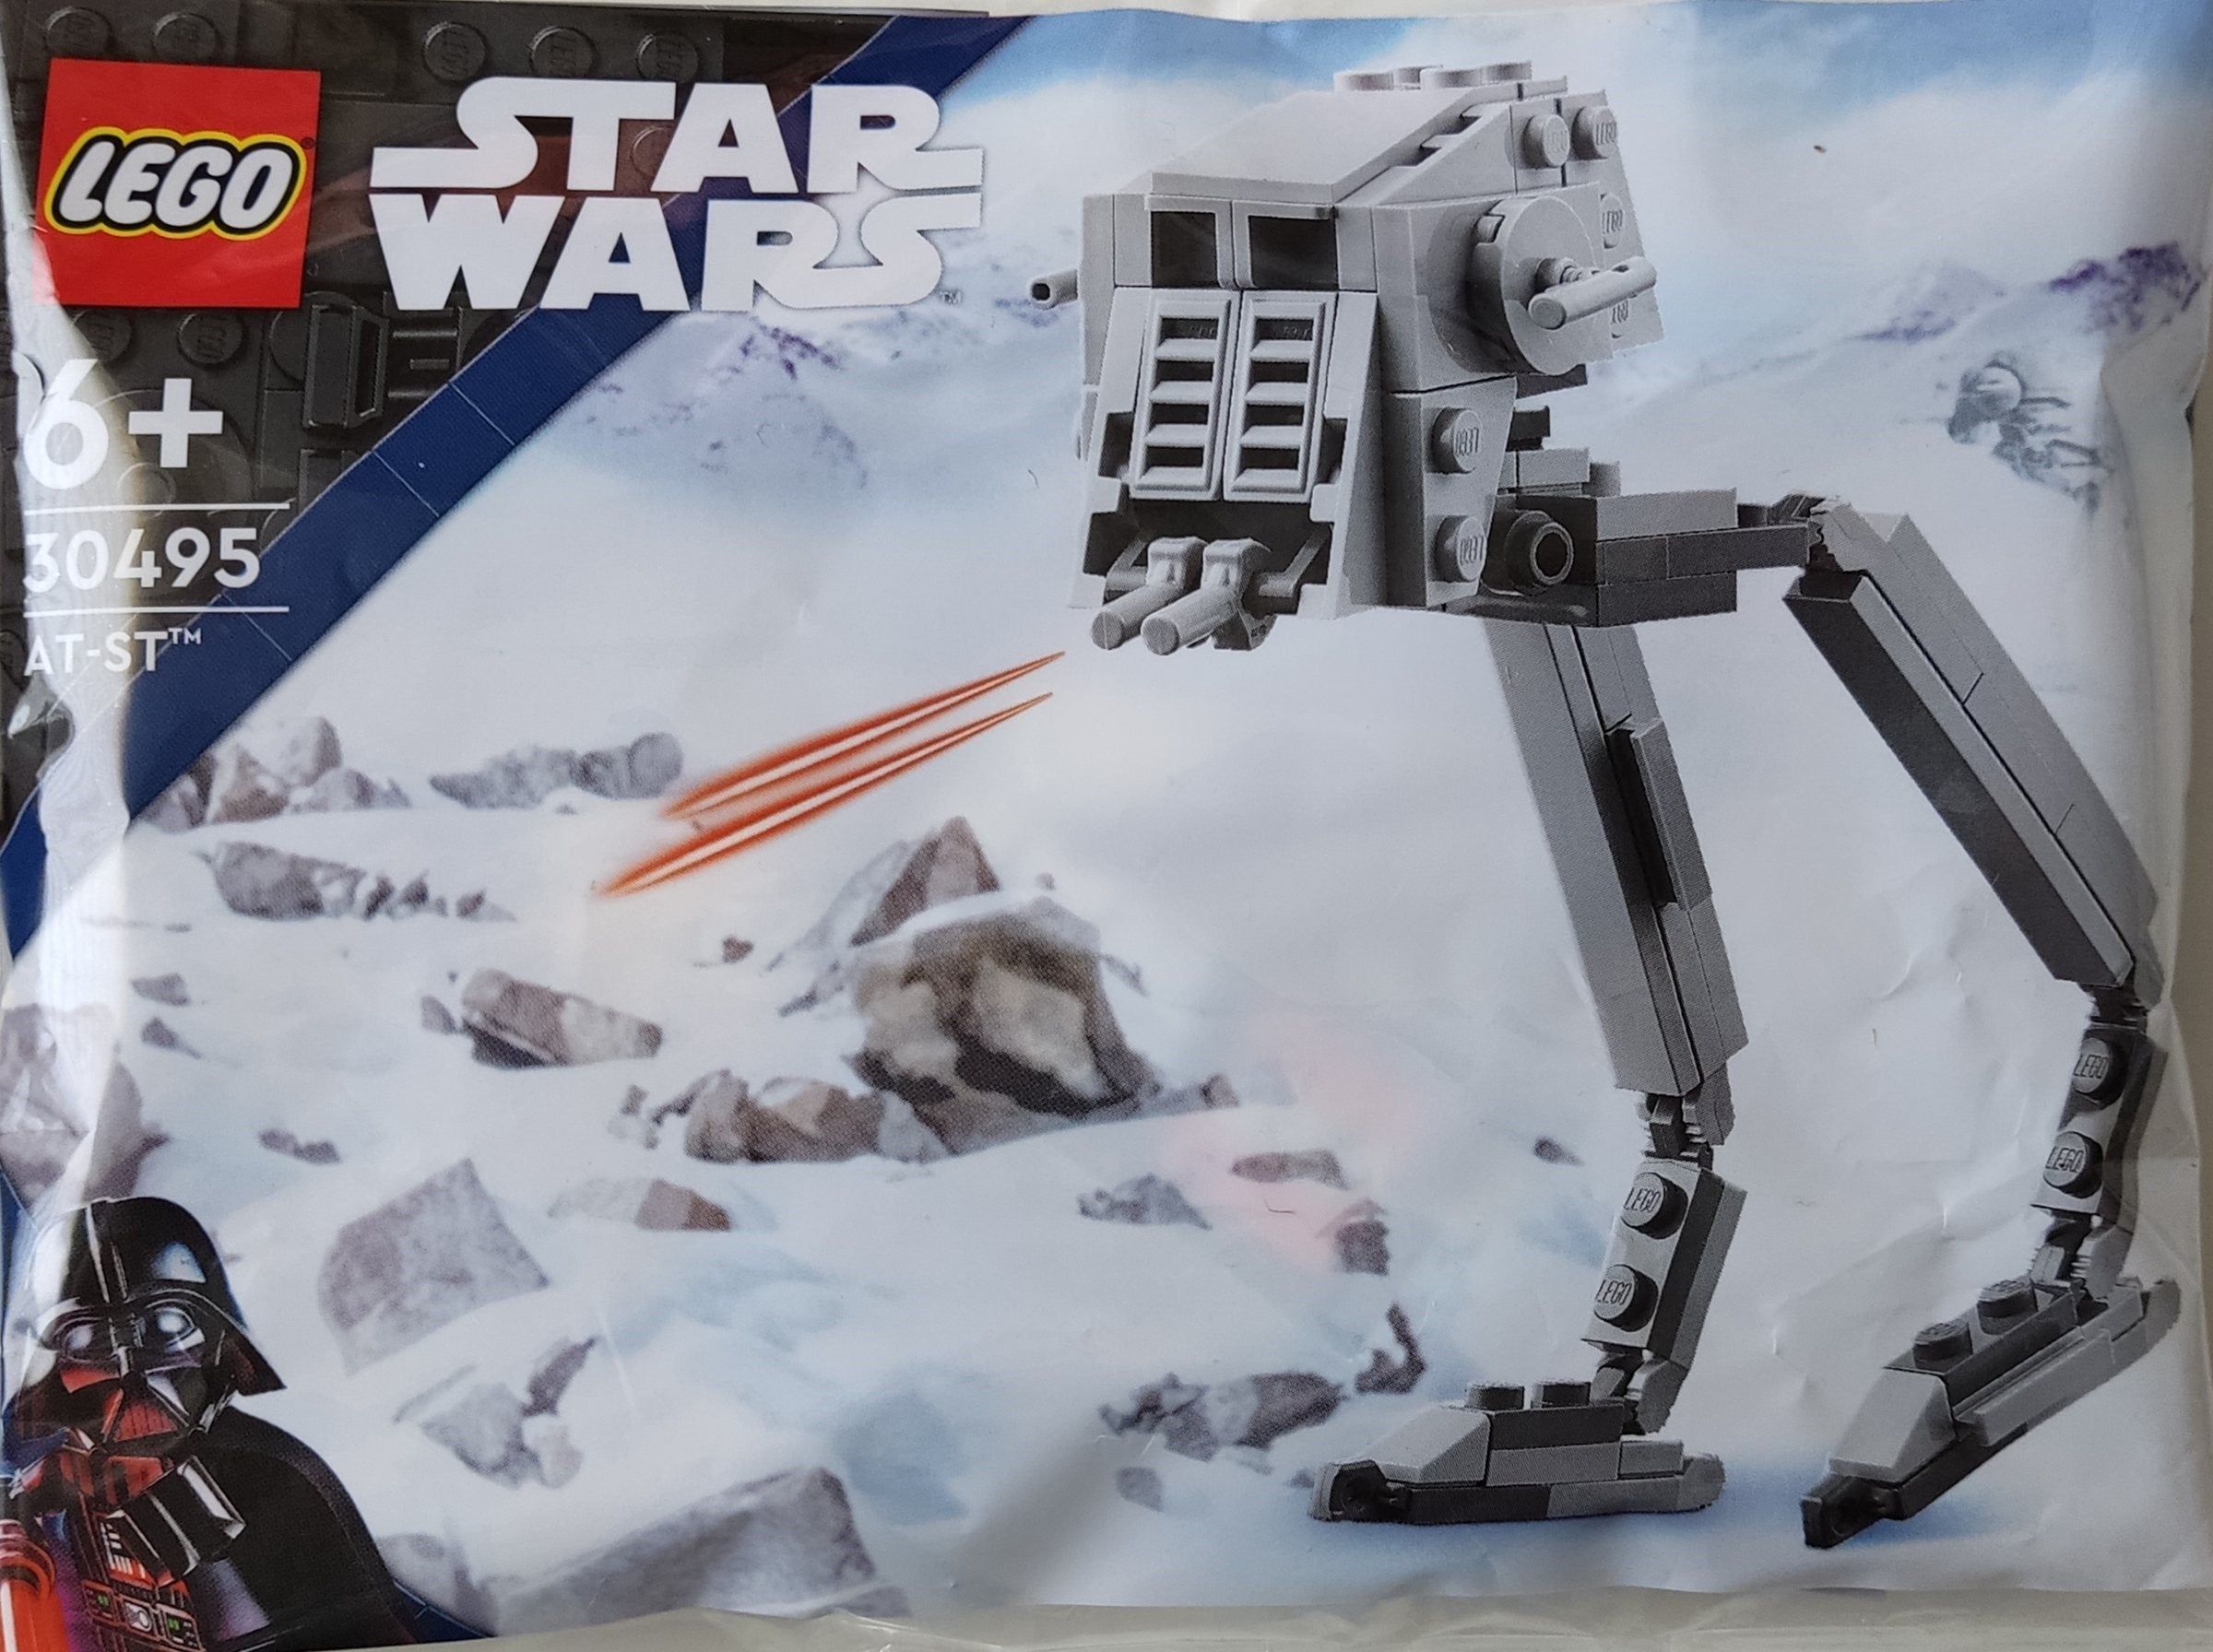 Lego Star Wars 30495 AT-ST polybag